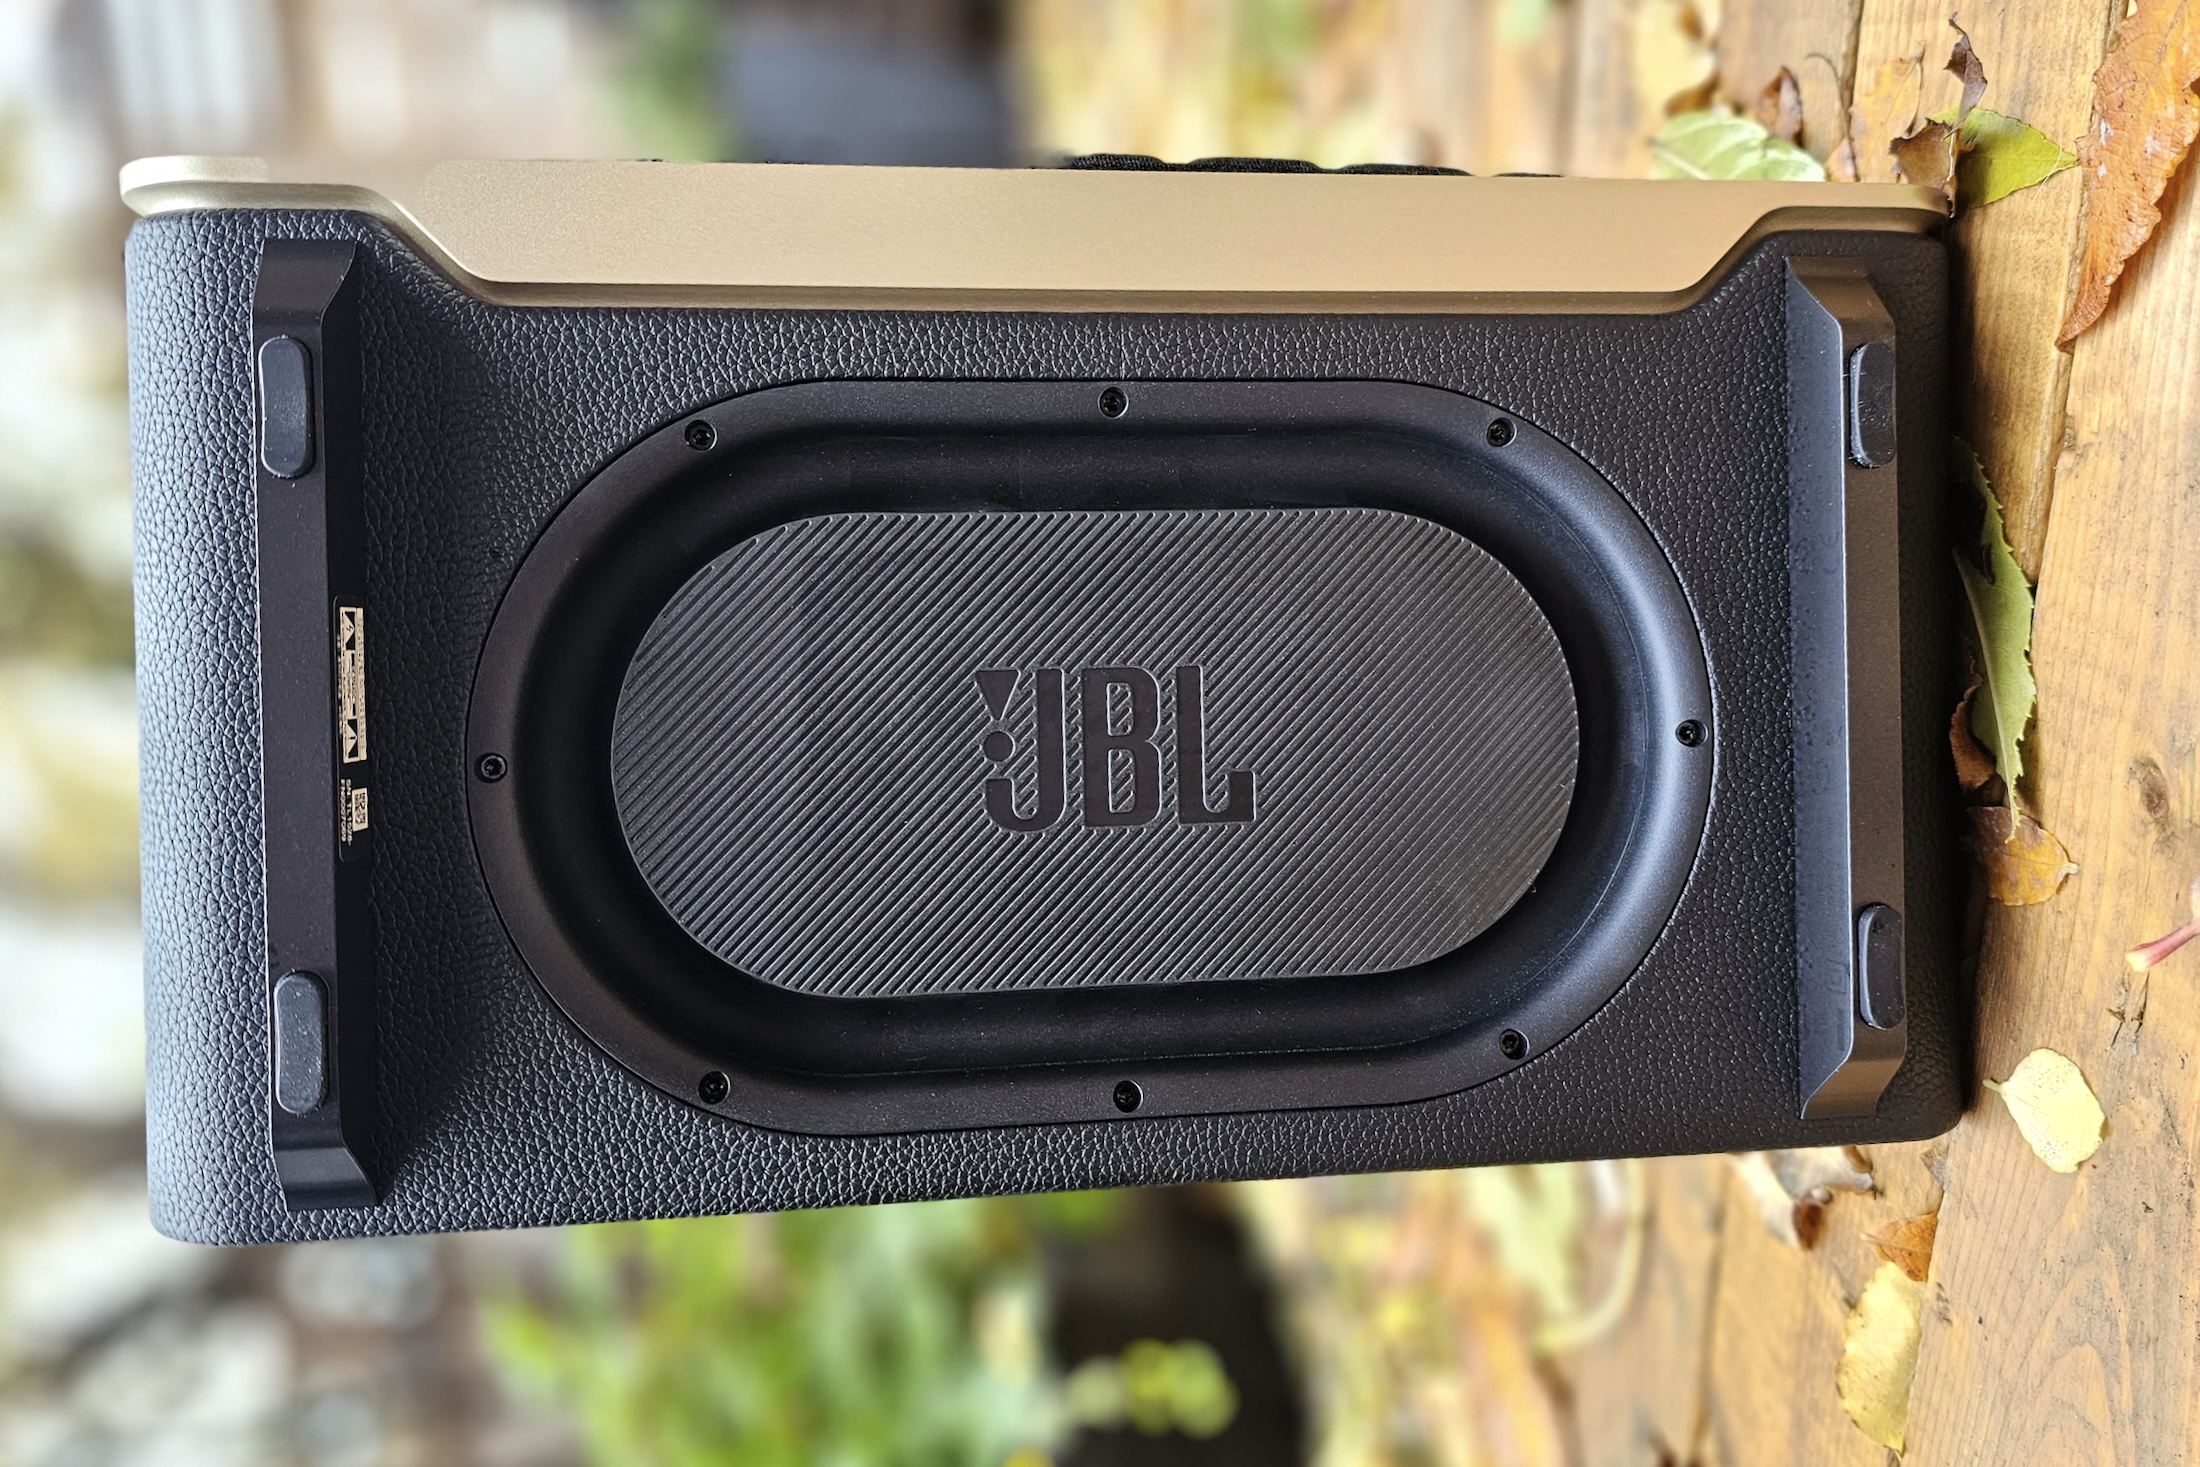 JBL Authentics 300 Portable wireless powered speaker with Wi-Fi and  Bluetooth® at Crutchfield